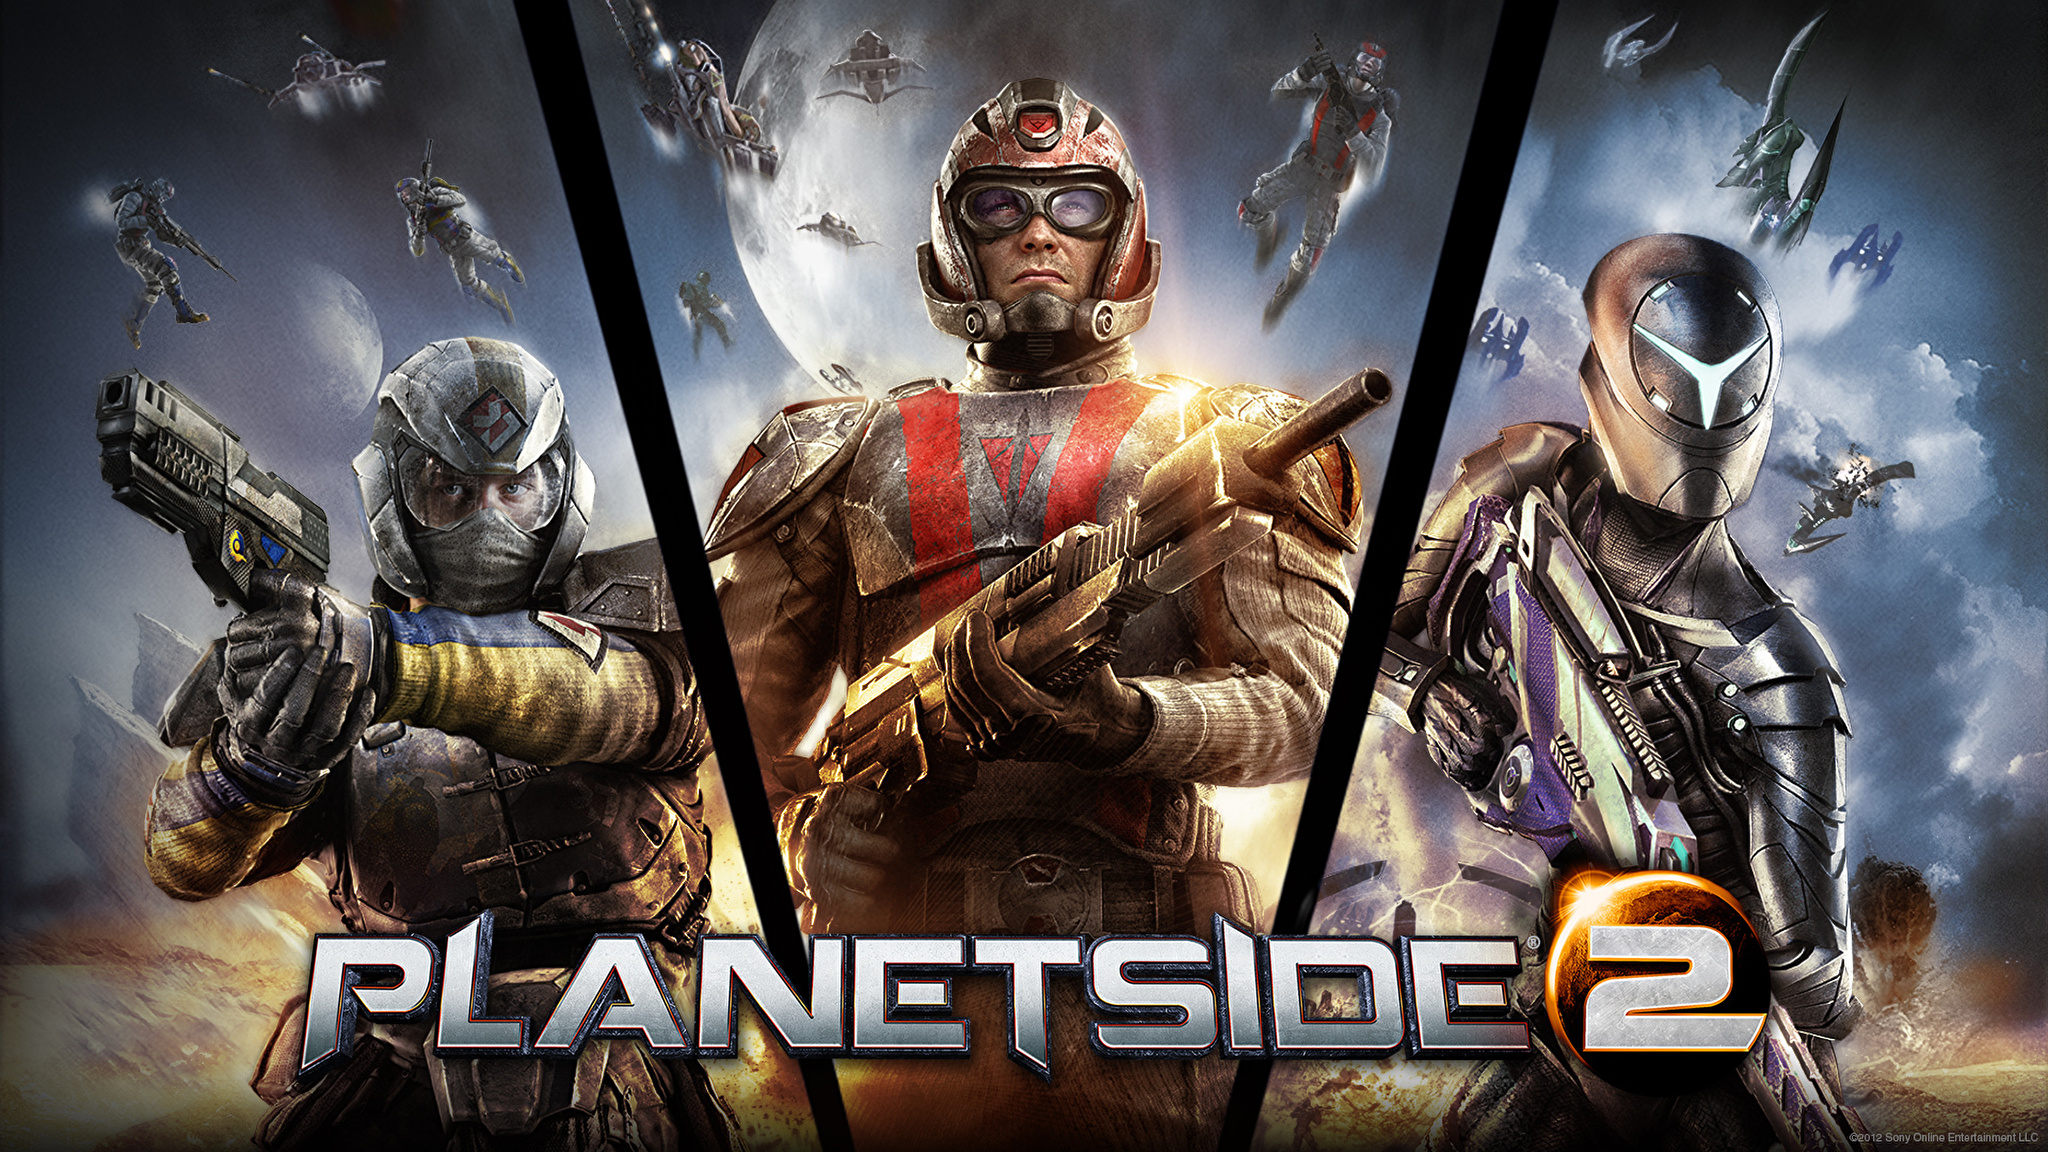 PlanetSide 2 adds Nvidia DLSS and AMD FSR support, API updates and more